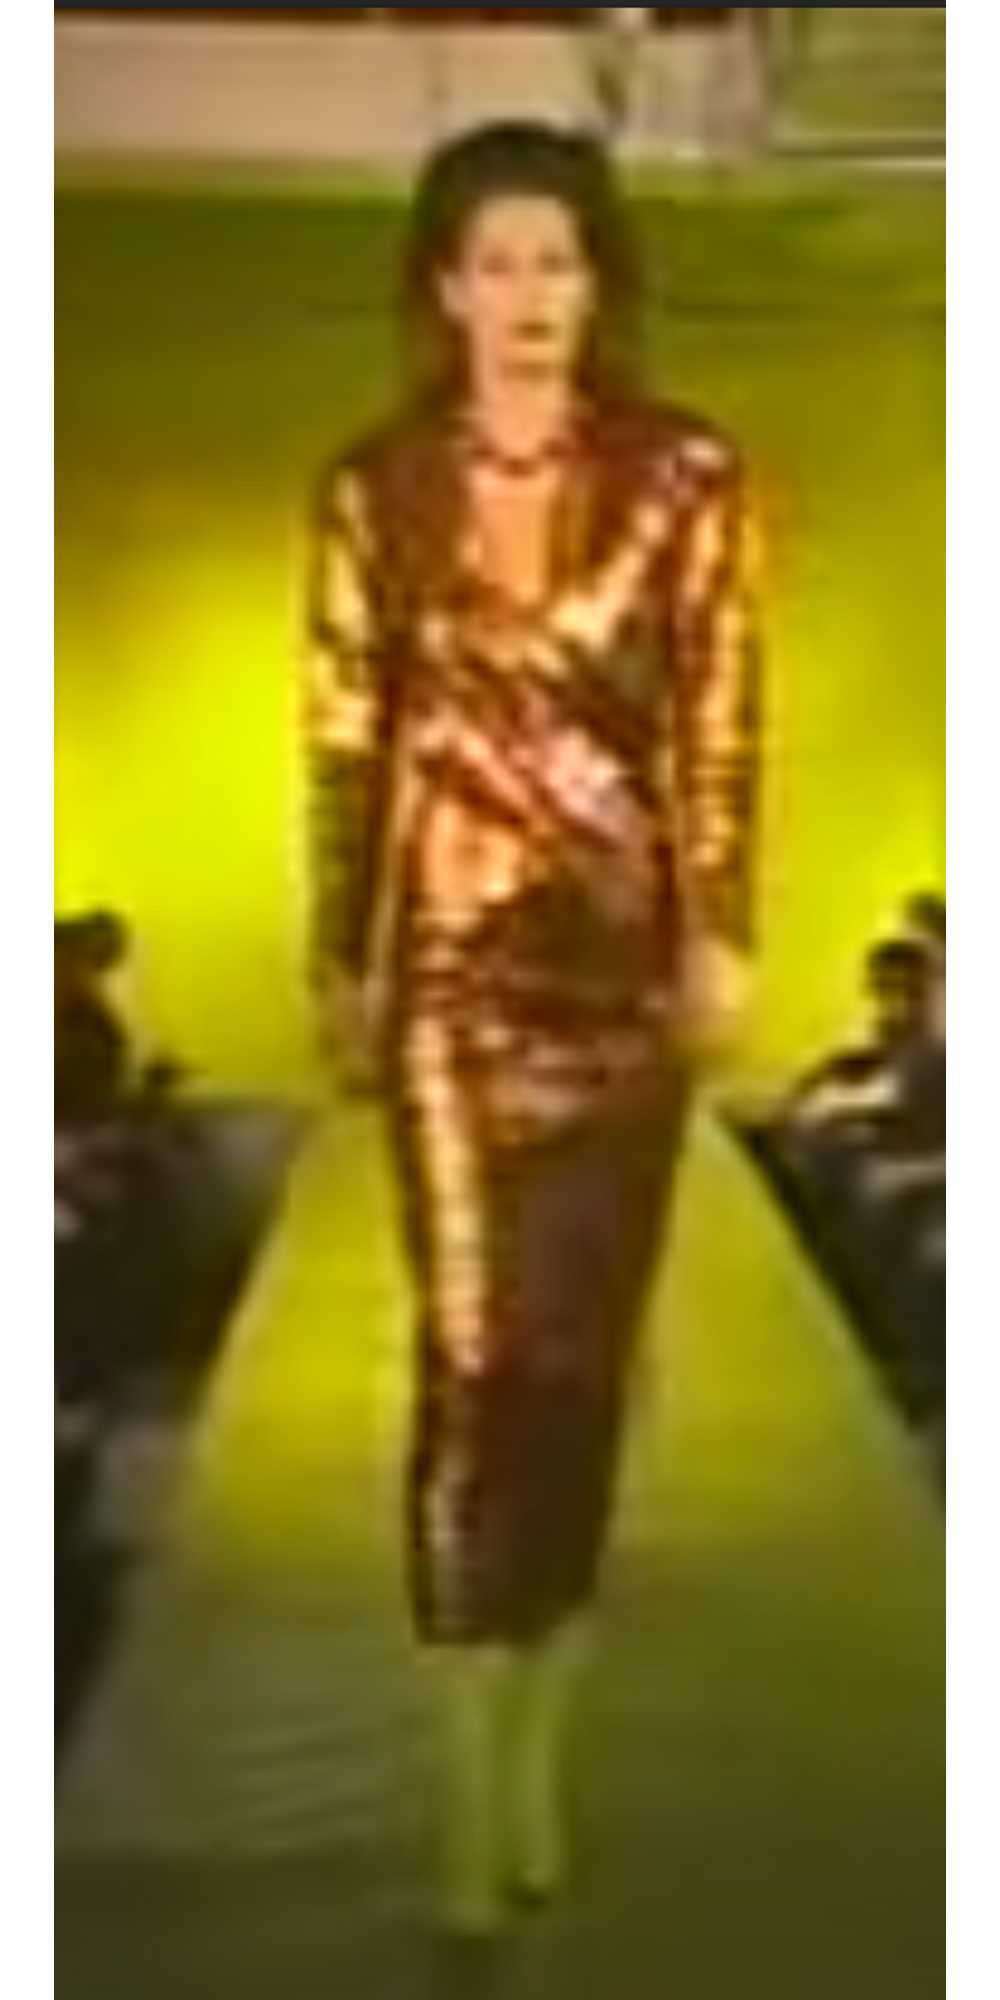 1988 STEPHEN SPROUSE Sequin Gown - image 6